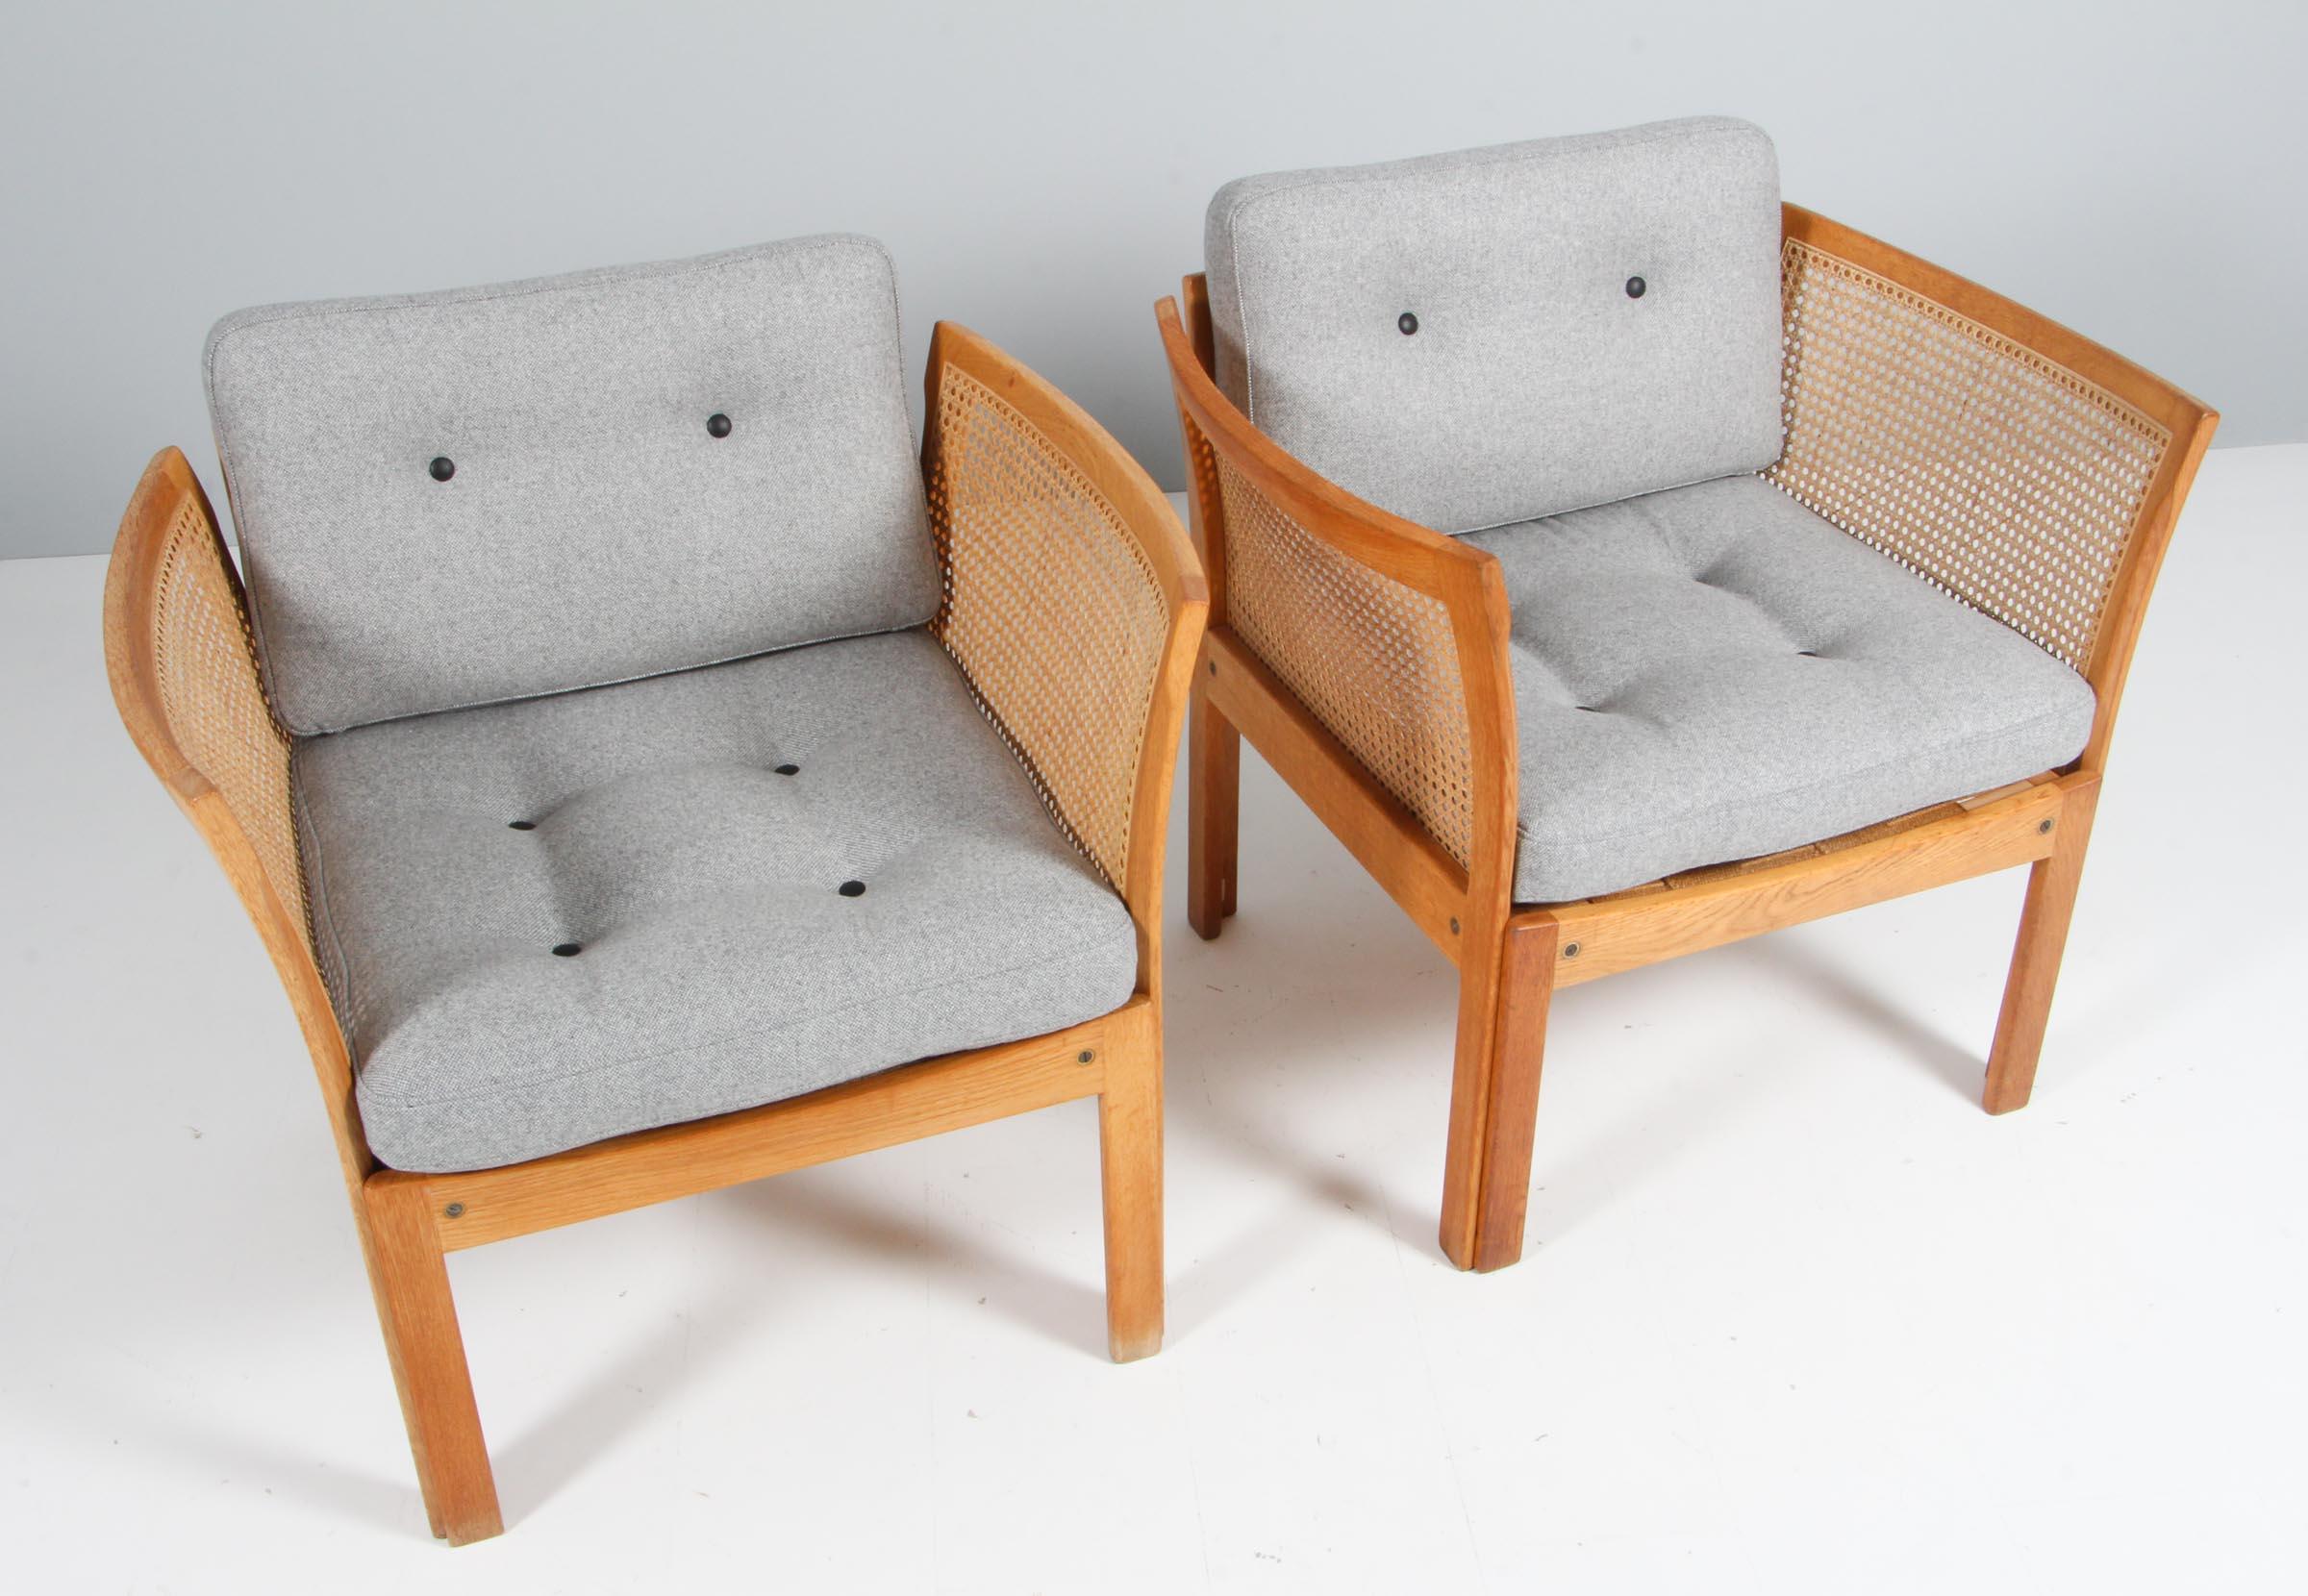 The plexus lounge chairs were designed by Illum Wikkelsø in the 1960s and produced by CFC Silkeborg.

The lounge chairs have been overlooked and refinished by our cabinetmaker and features a frame in oak with braided sides and back and new